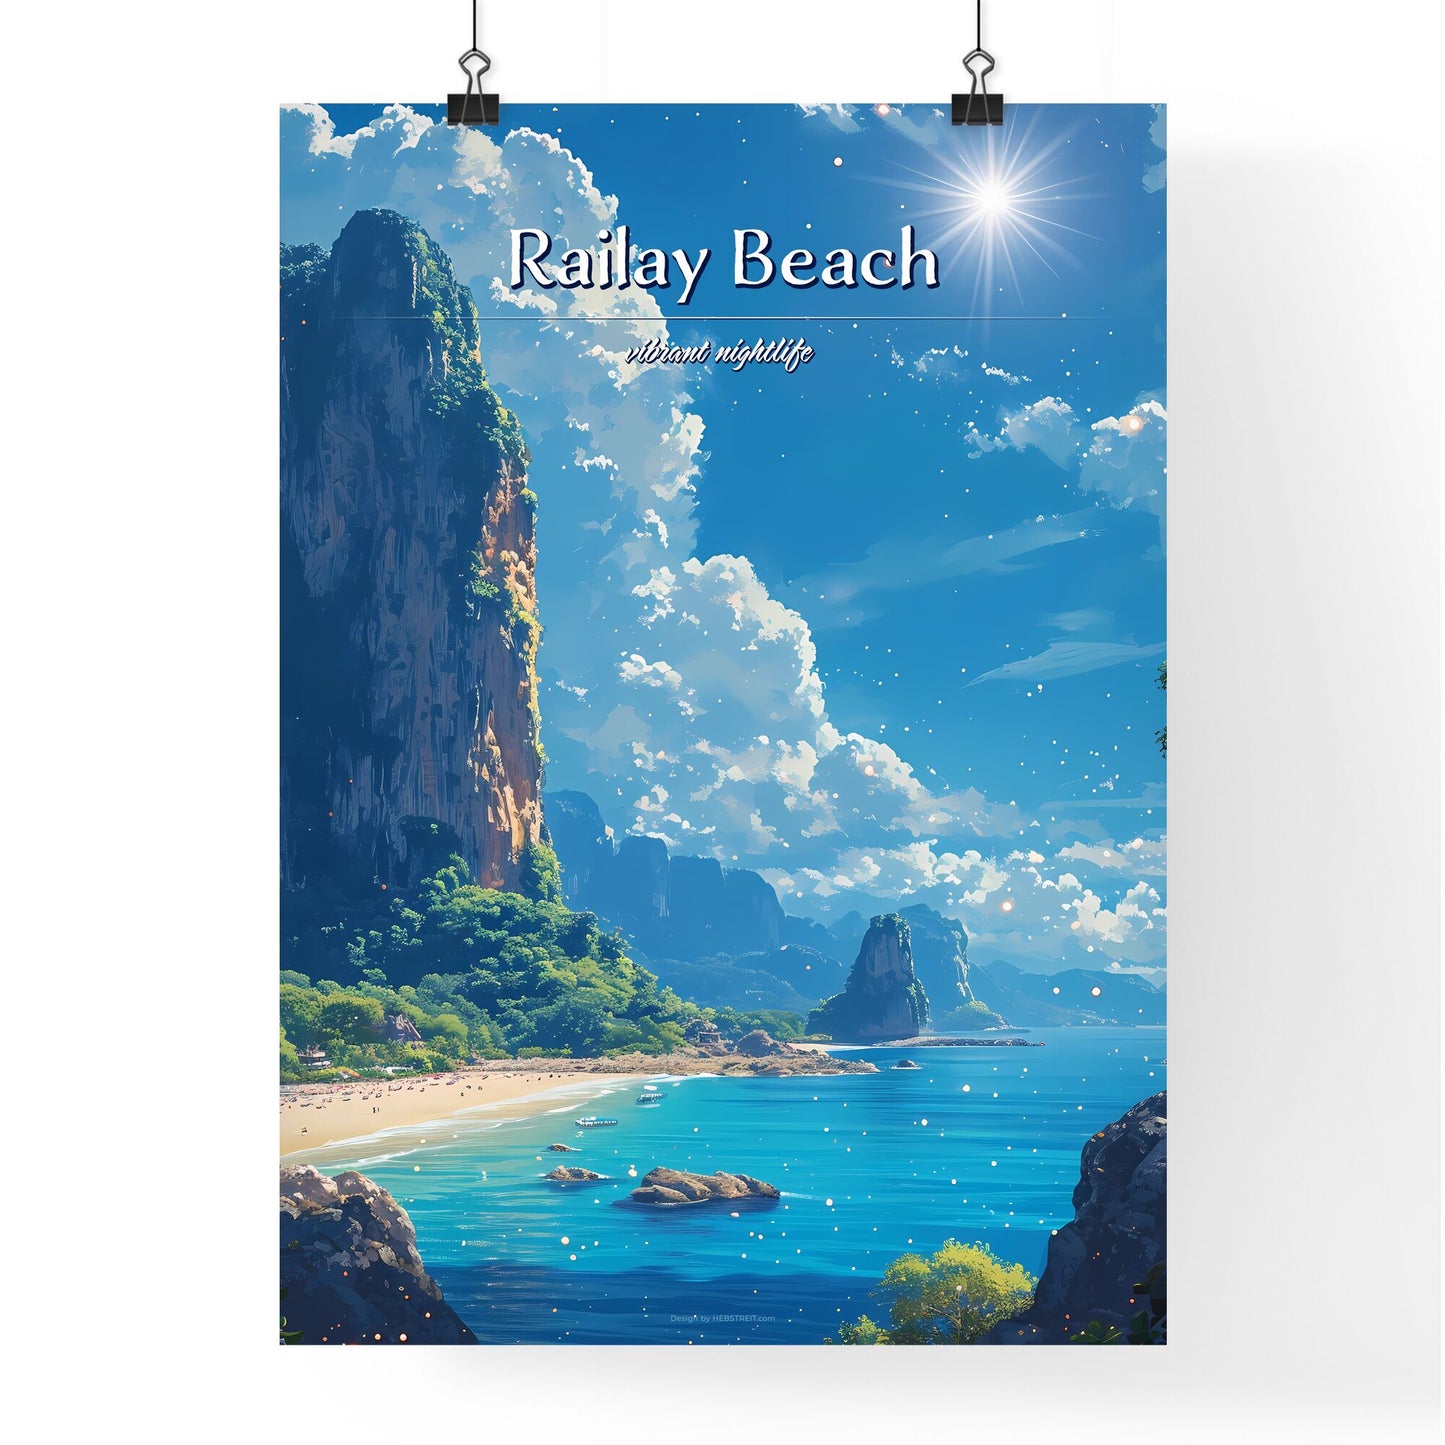 Railay Beach - Art print of a beach with rocks and trees Default Title